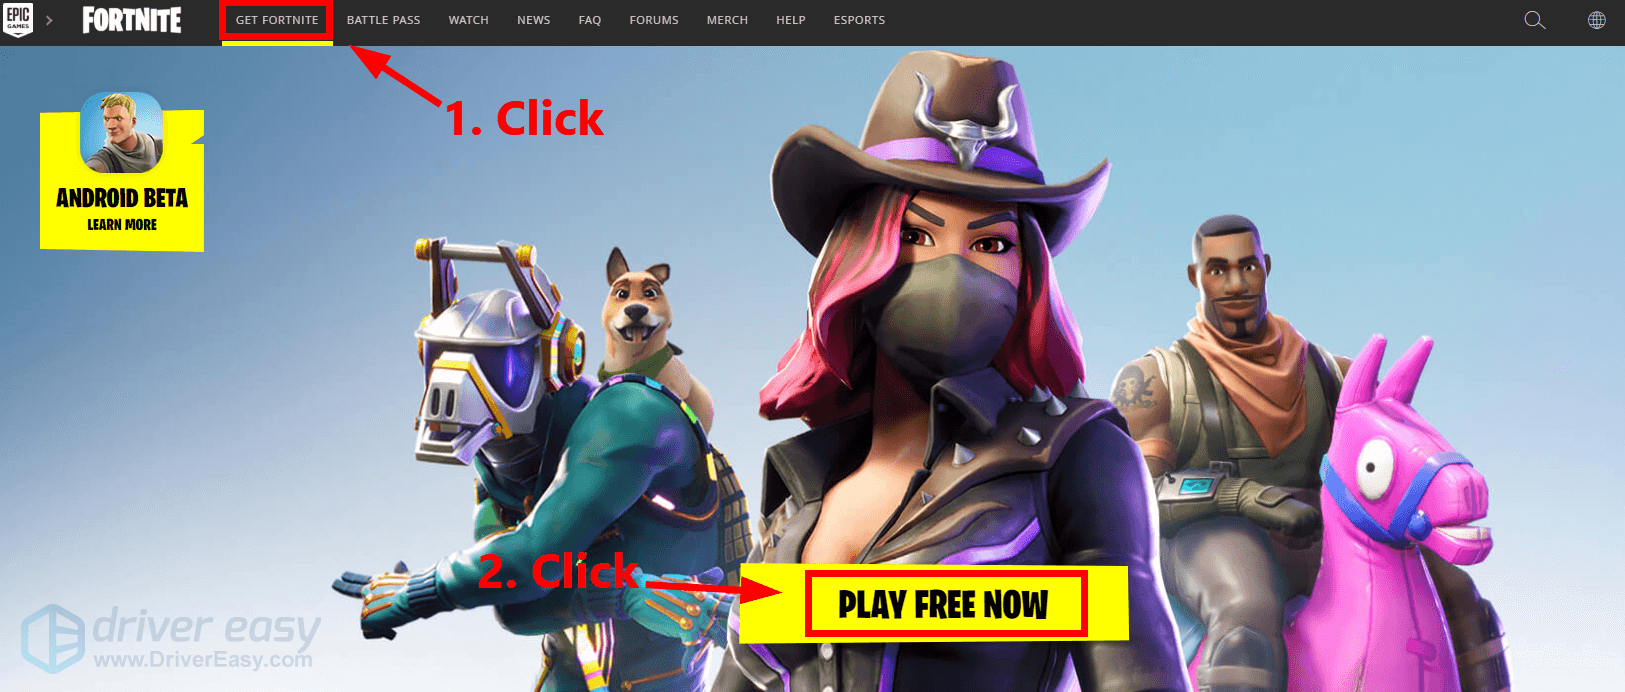 How to download Fortnite on PC [SOLVED] Driver Easy